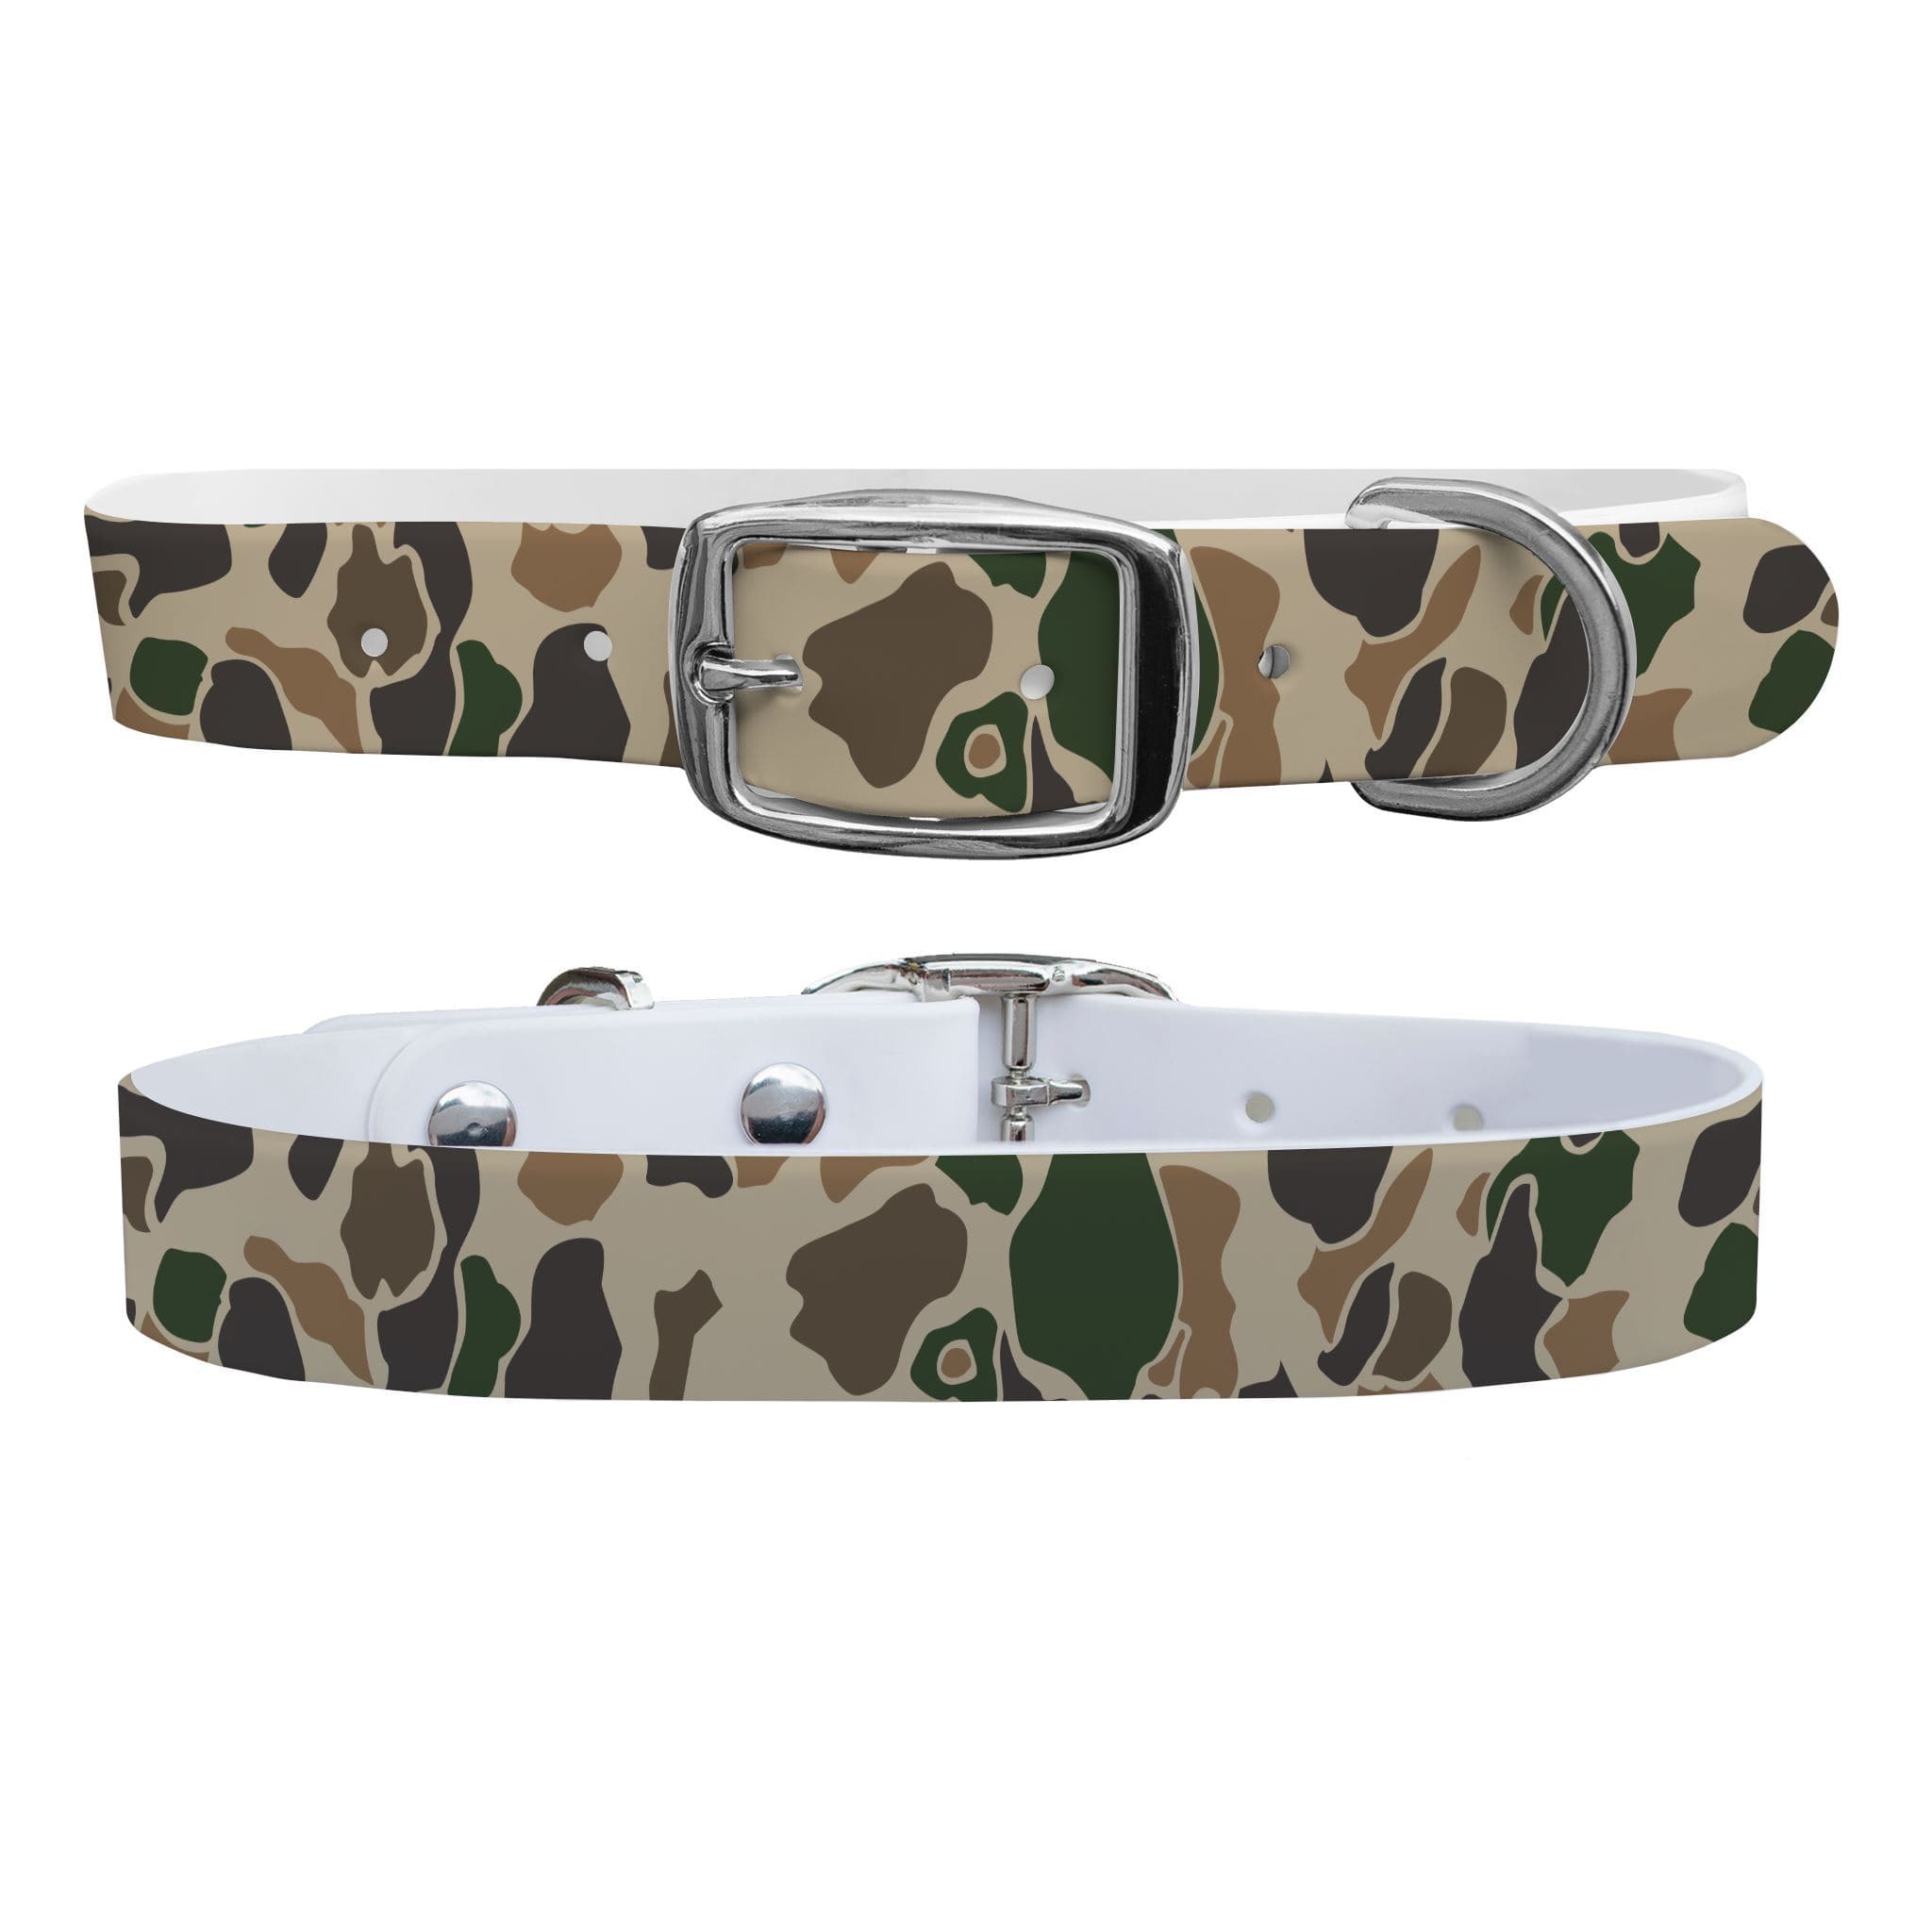 CP - Brigadier Camo Dog Collar With Silver Buckle - X-Large